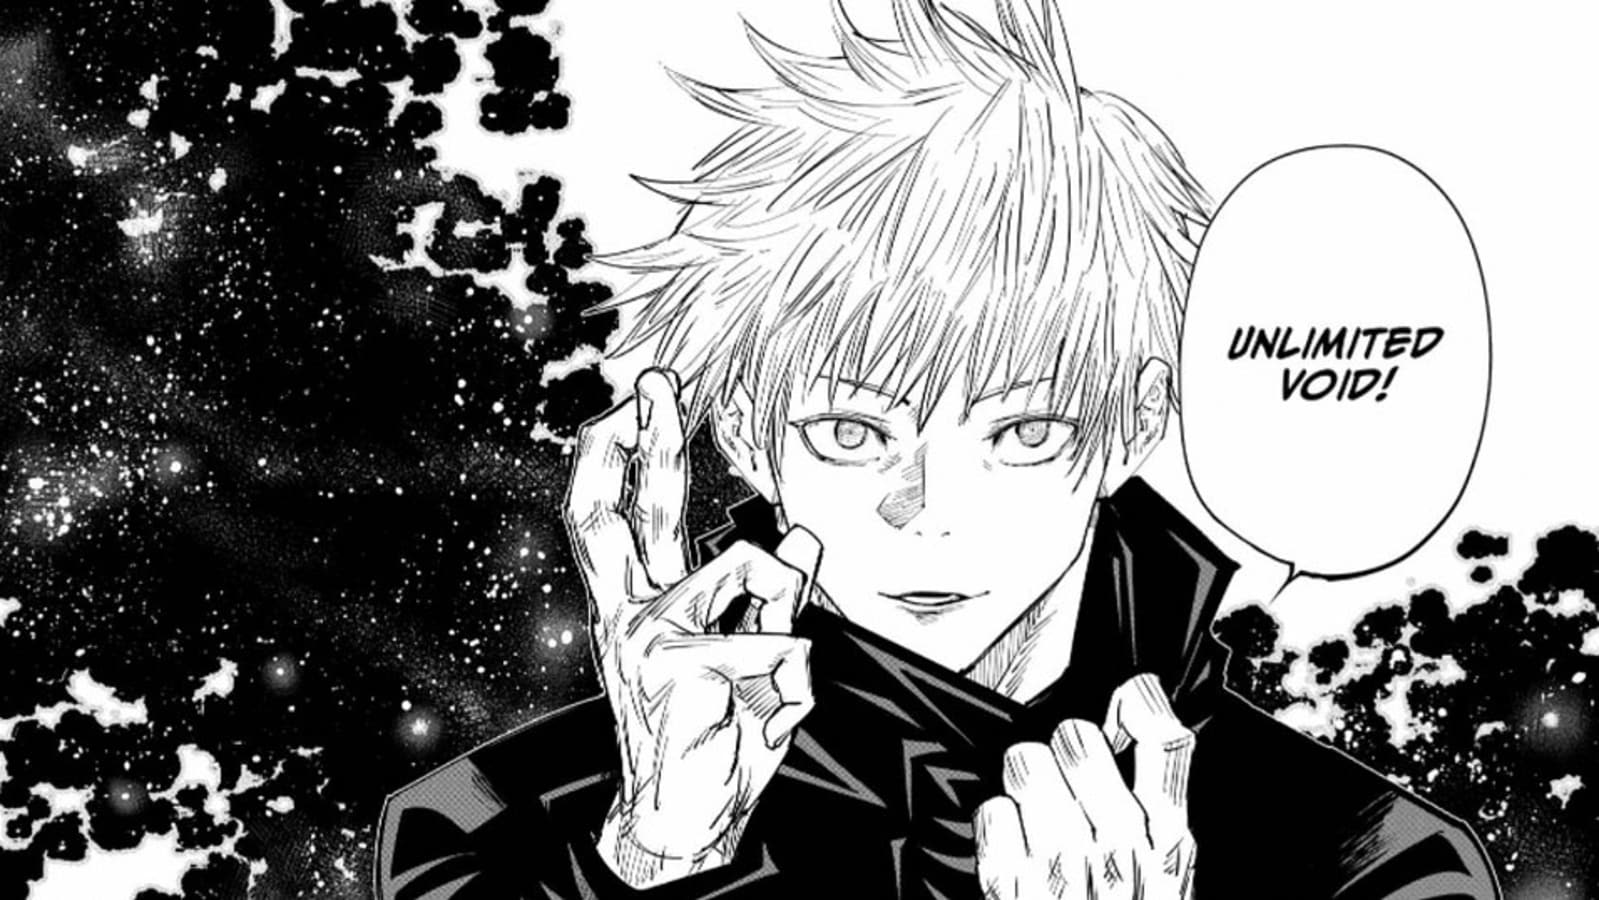 Jujutsu Kaisen Chapter 232 Full Summary Out! Get the Thrilling Details Now! 16